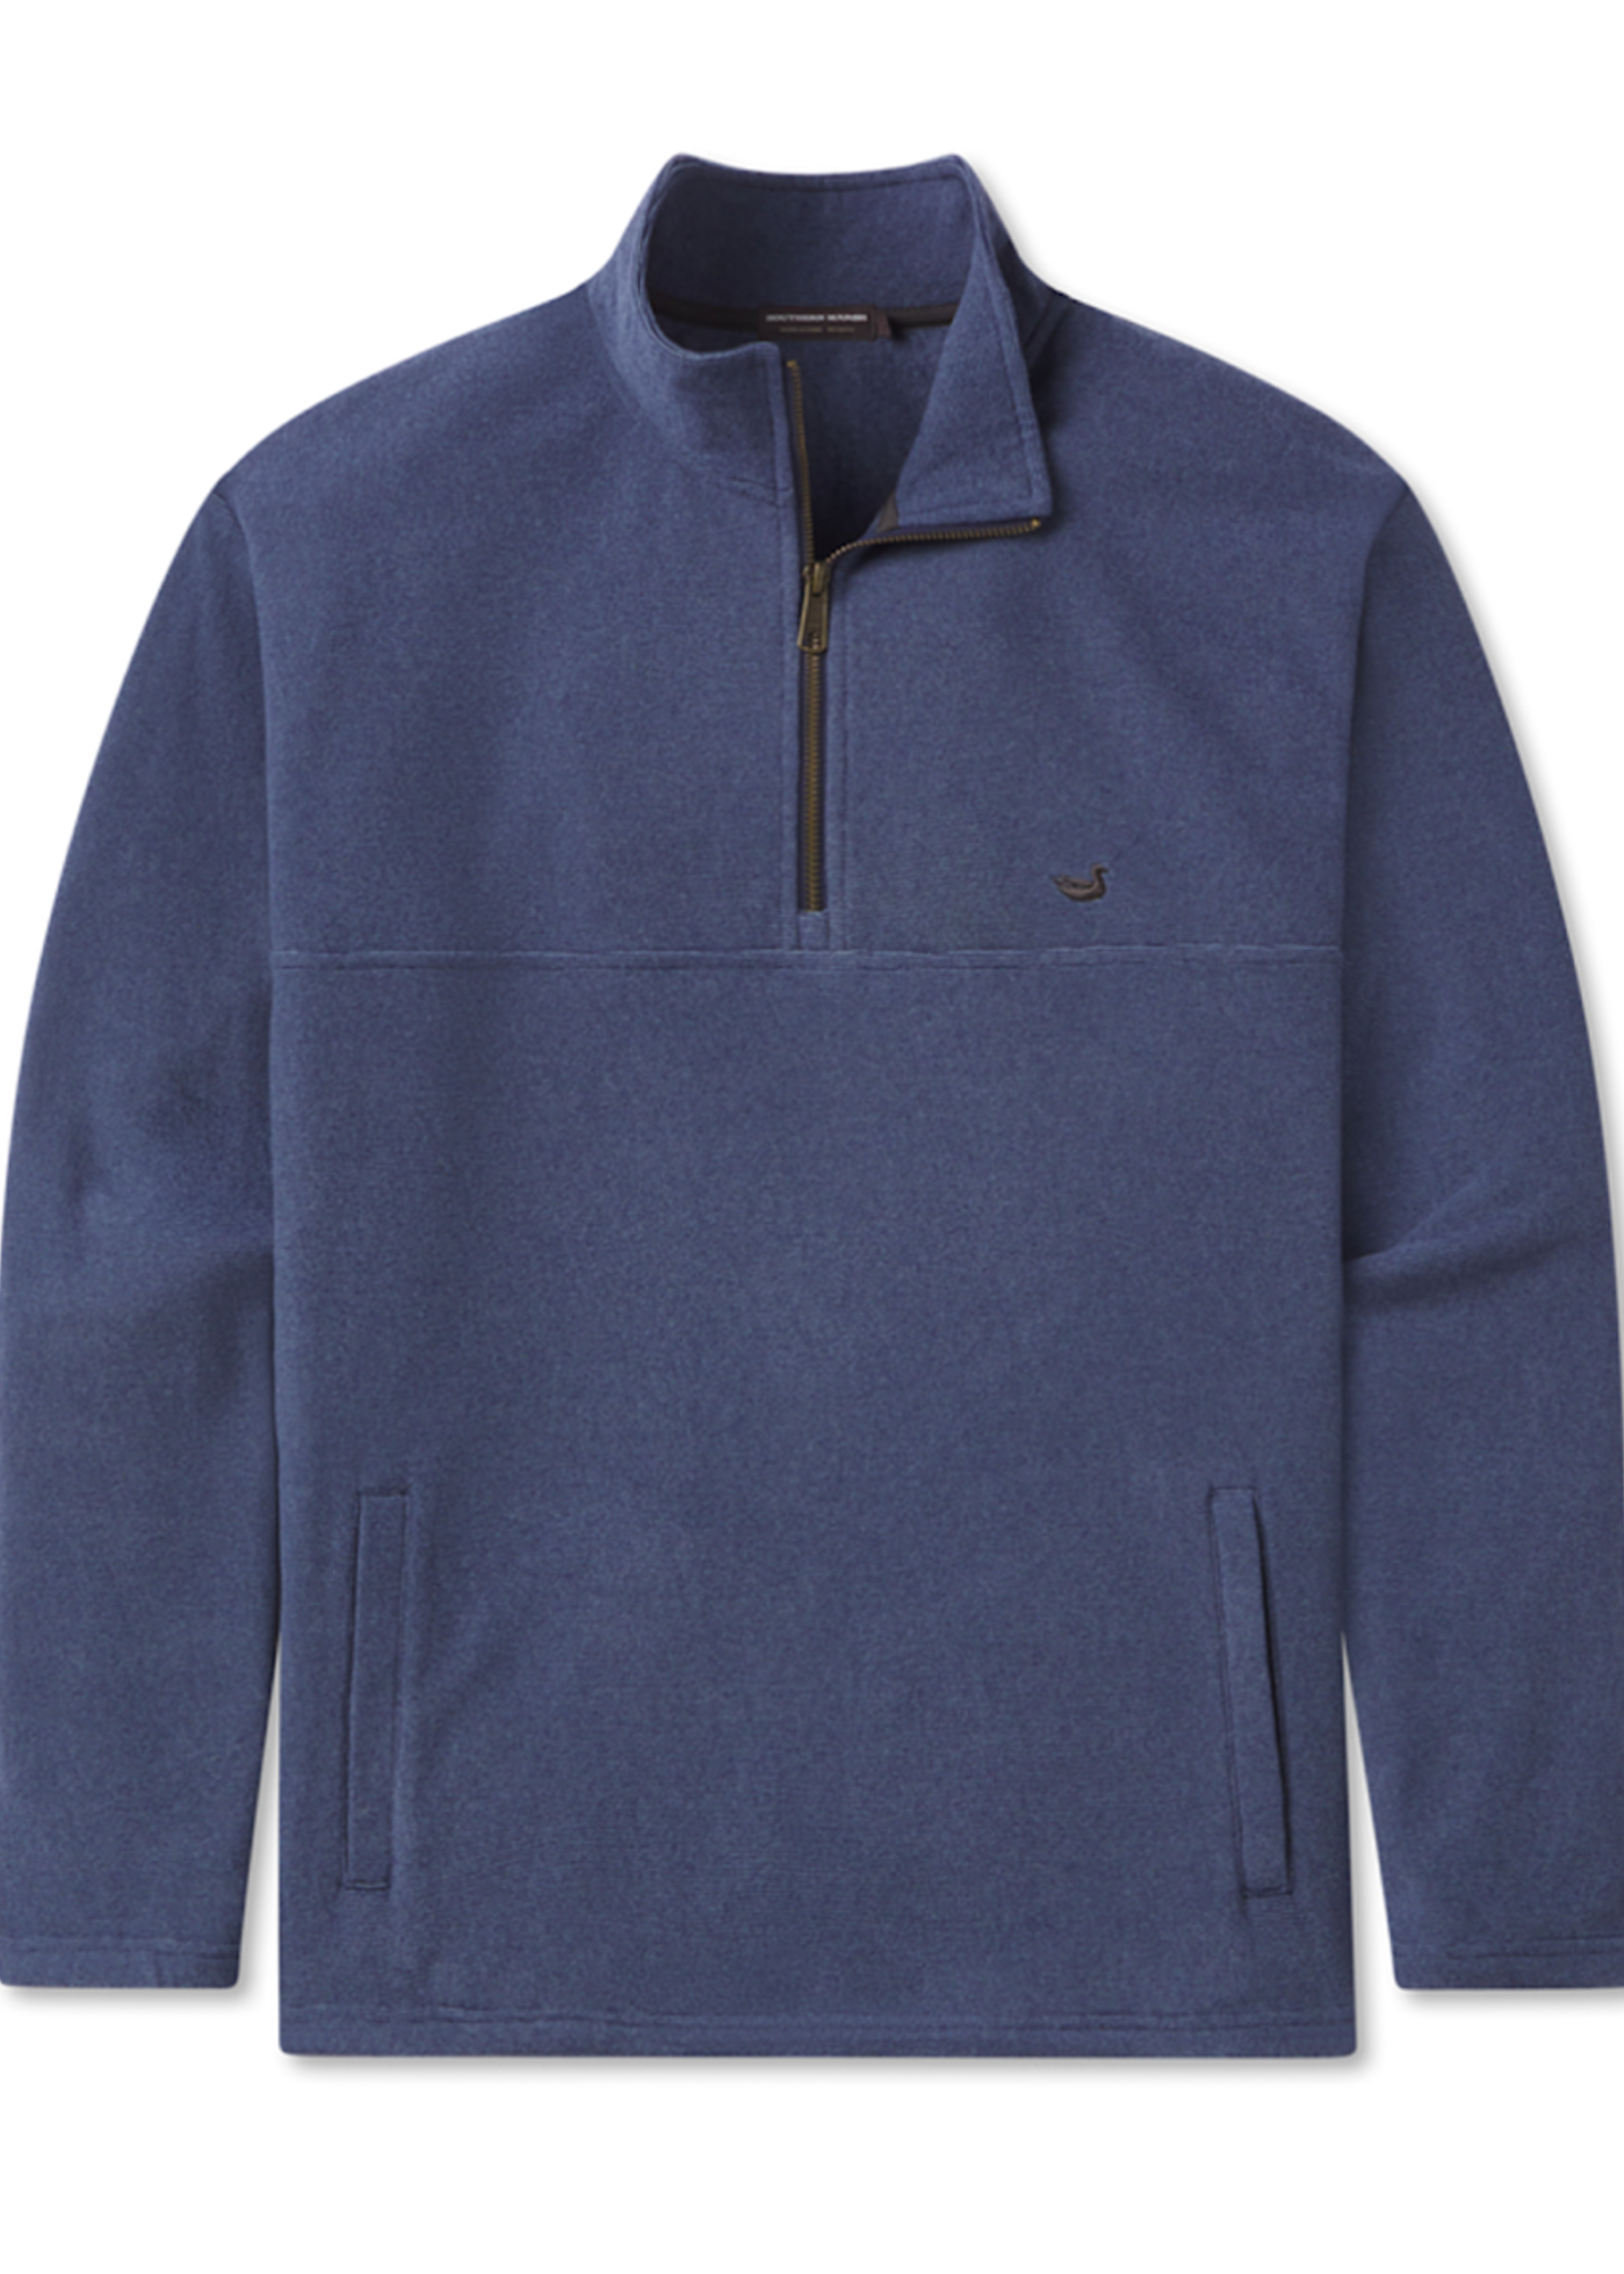 Southern Marsh Southern Marsh Bronze Bluff Pullover Oxford Blue